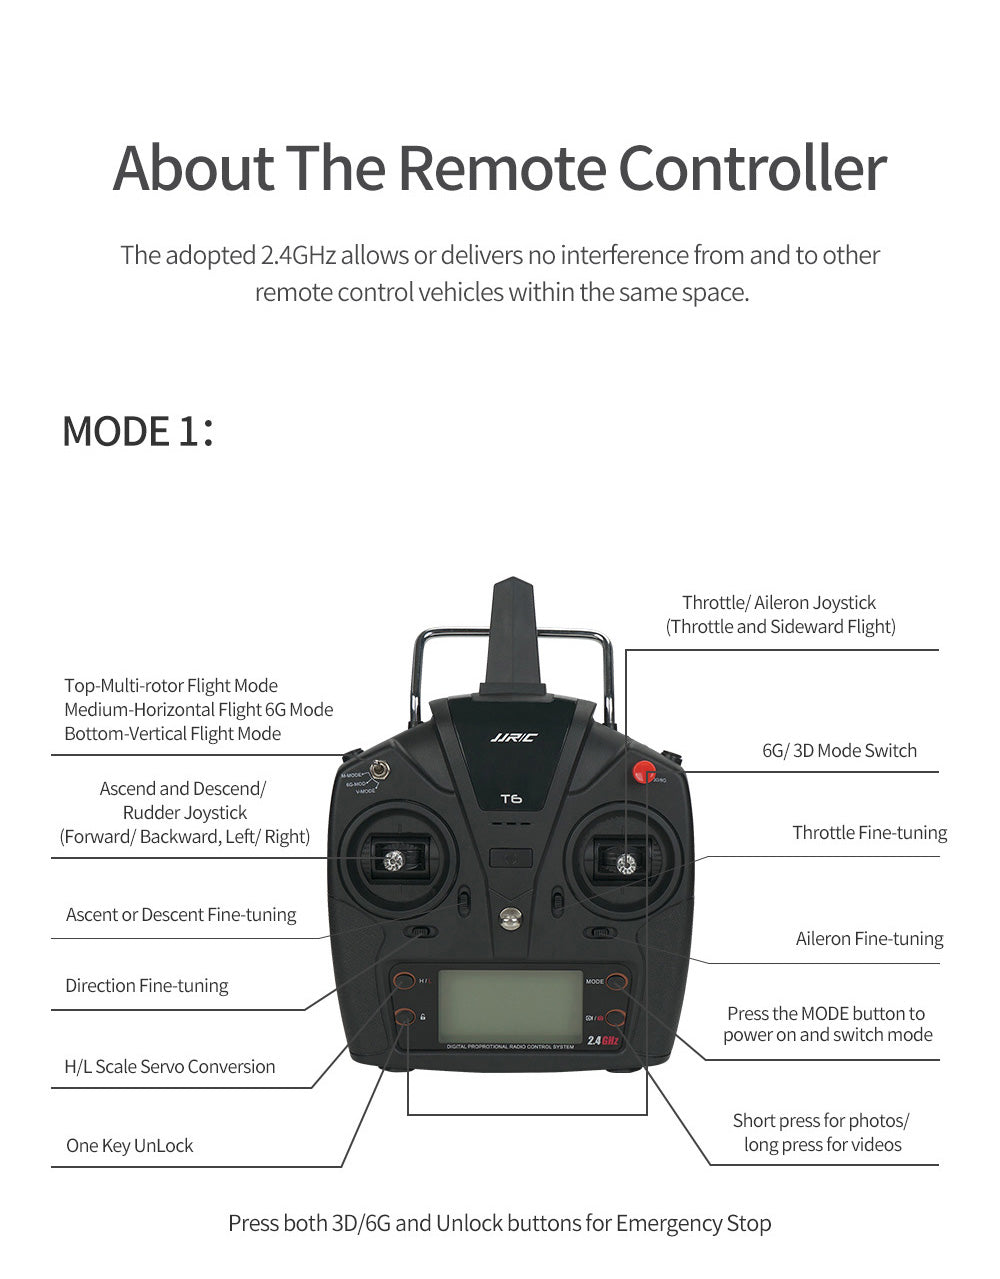 The adopted 2.4GHz allows or delivers no interference from and to other remote control vehicles within the same space.